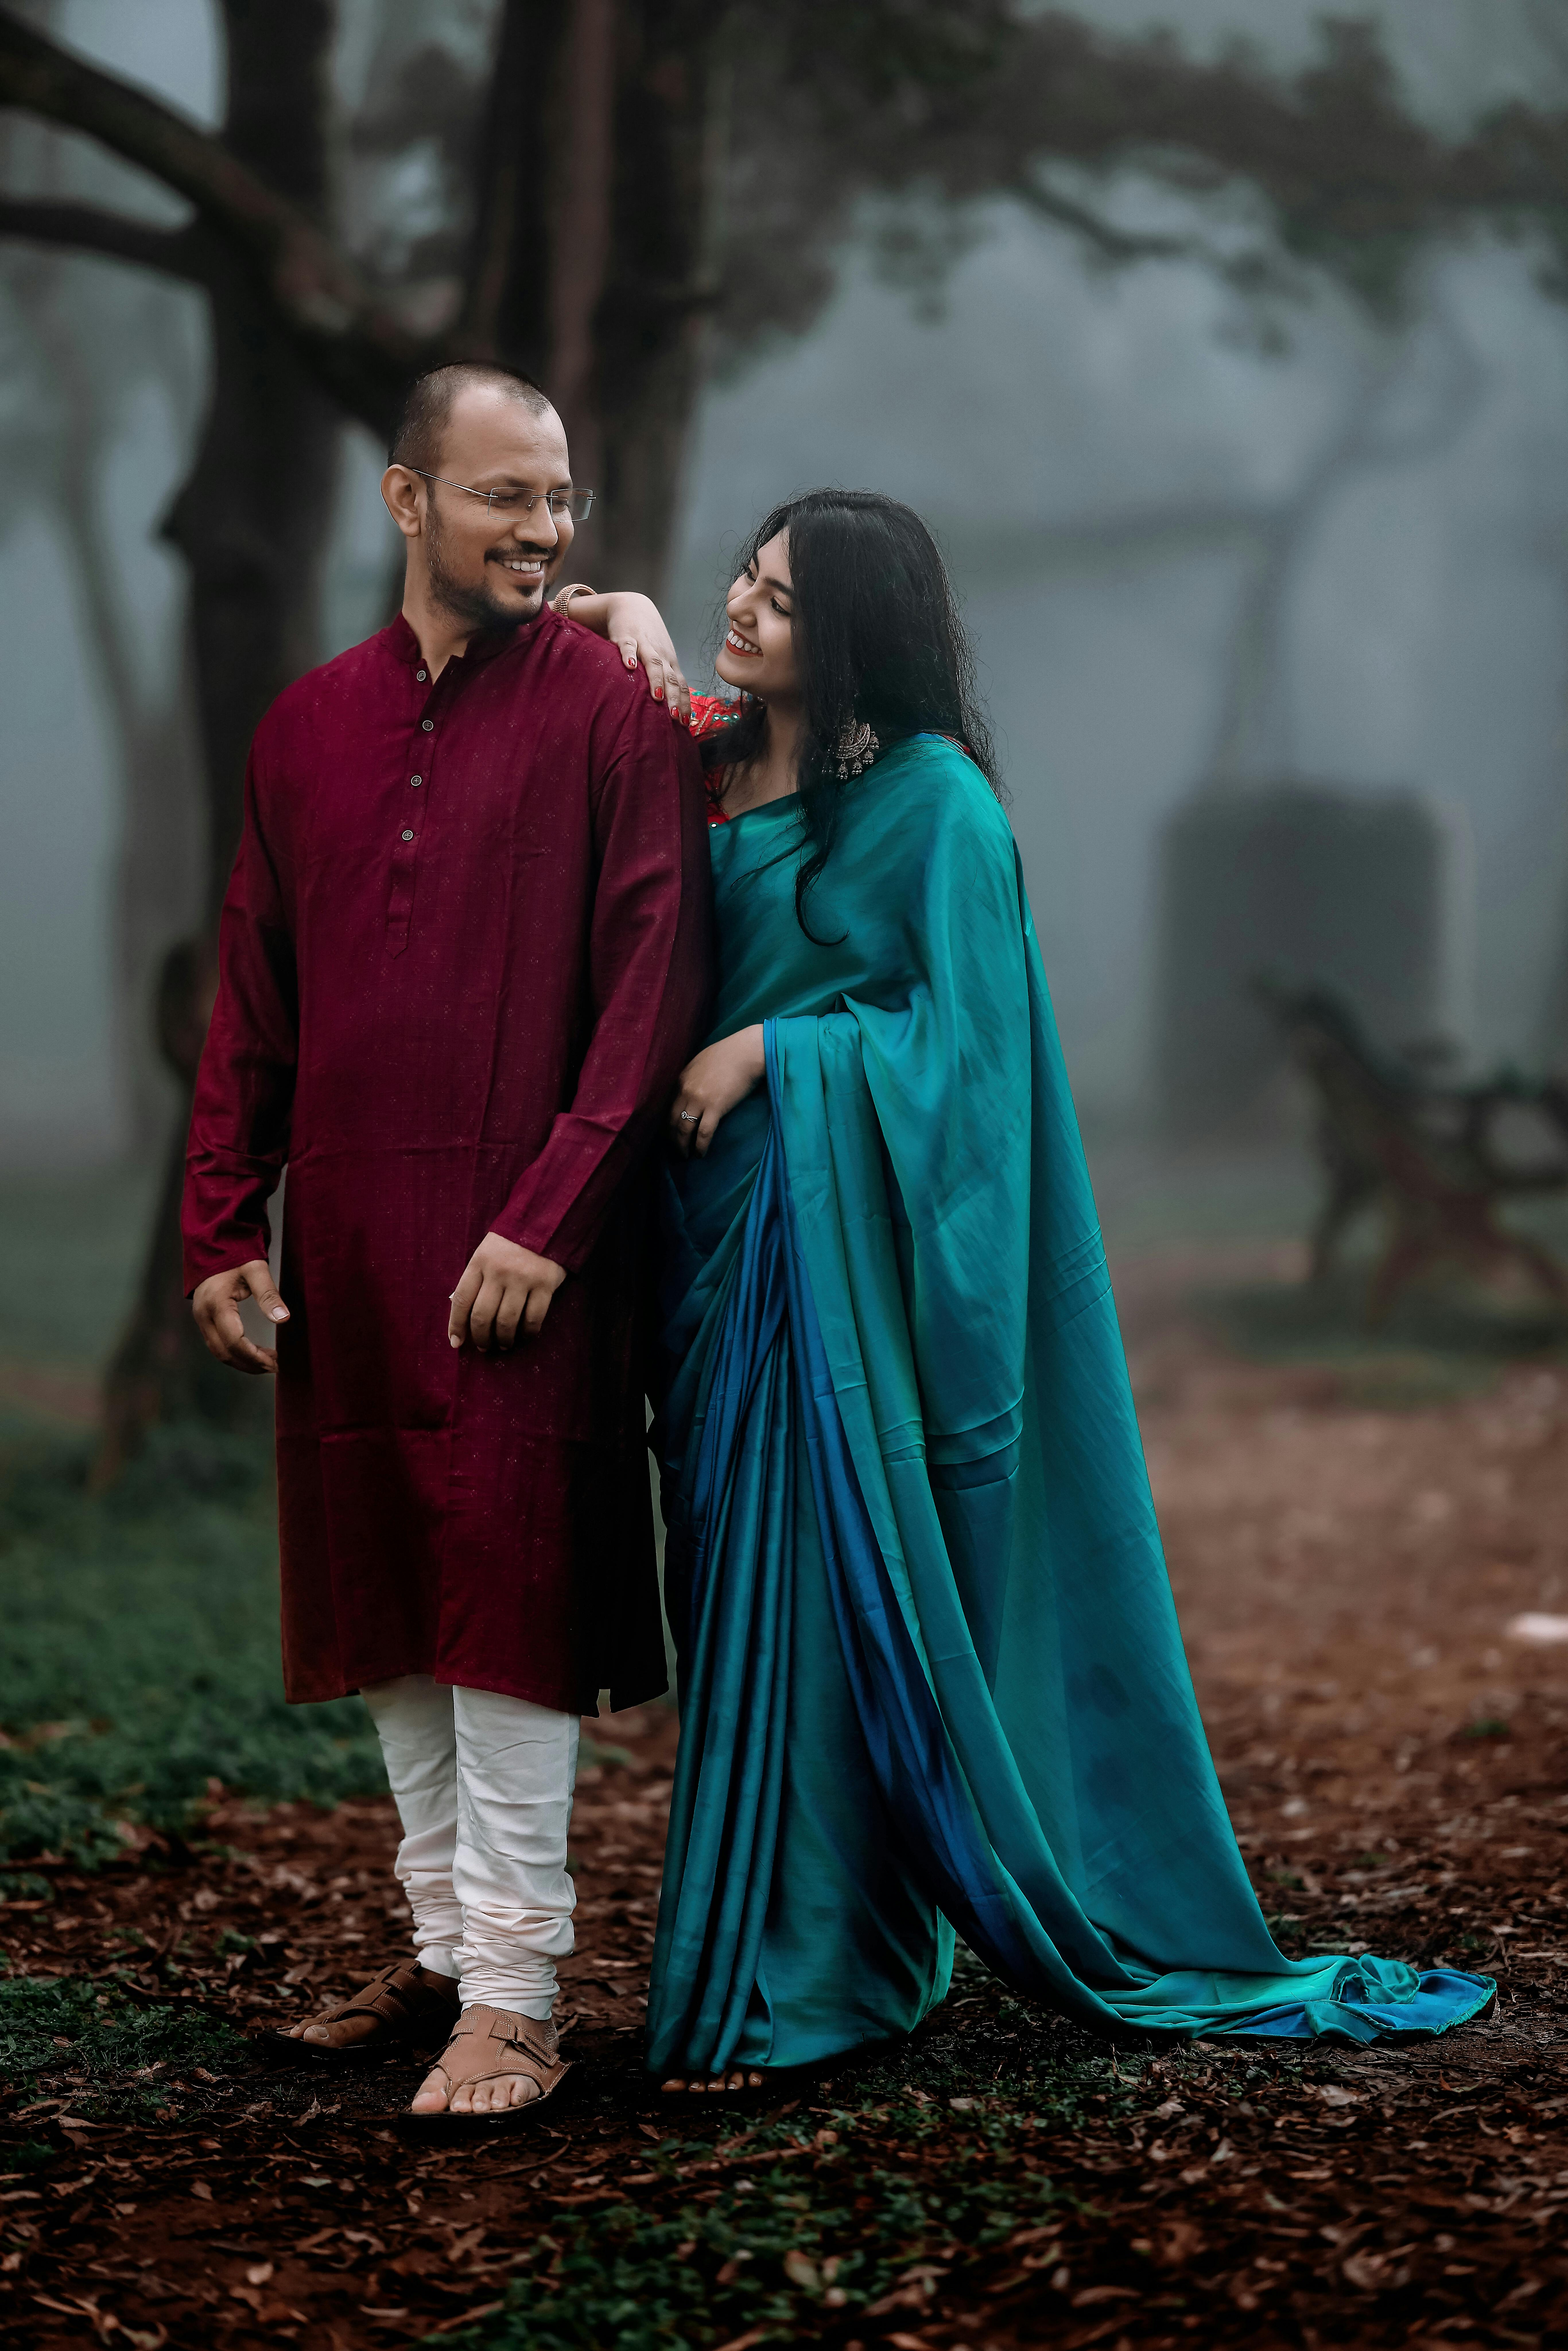 A Couple Wearing Traditional Clothes · Free Stock Photo